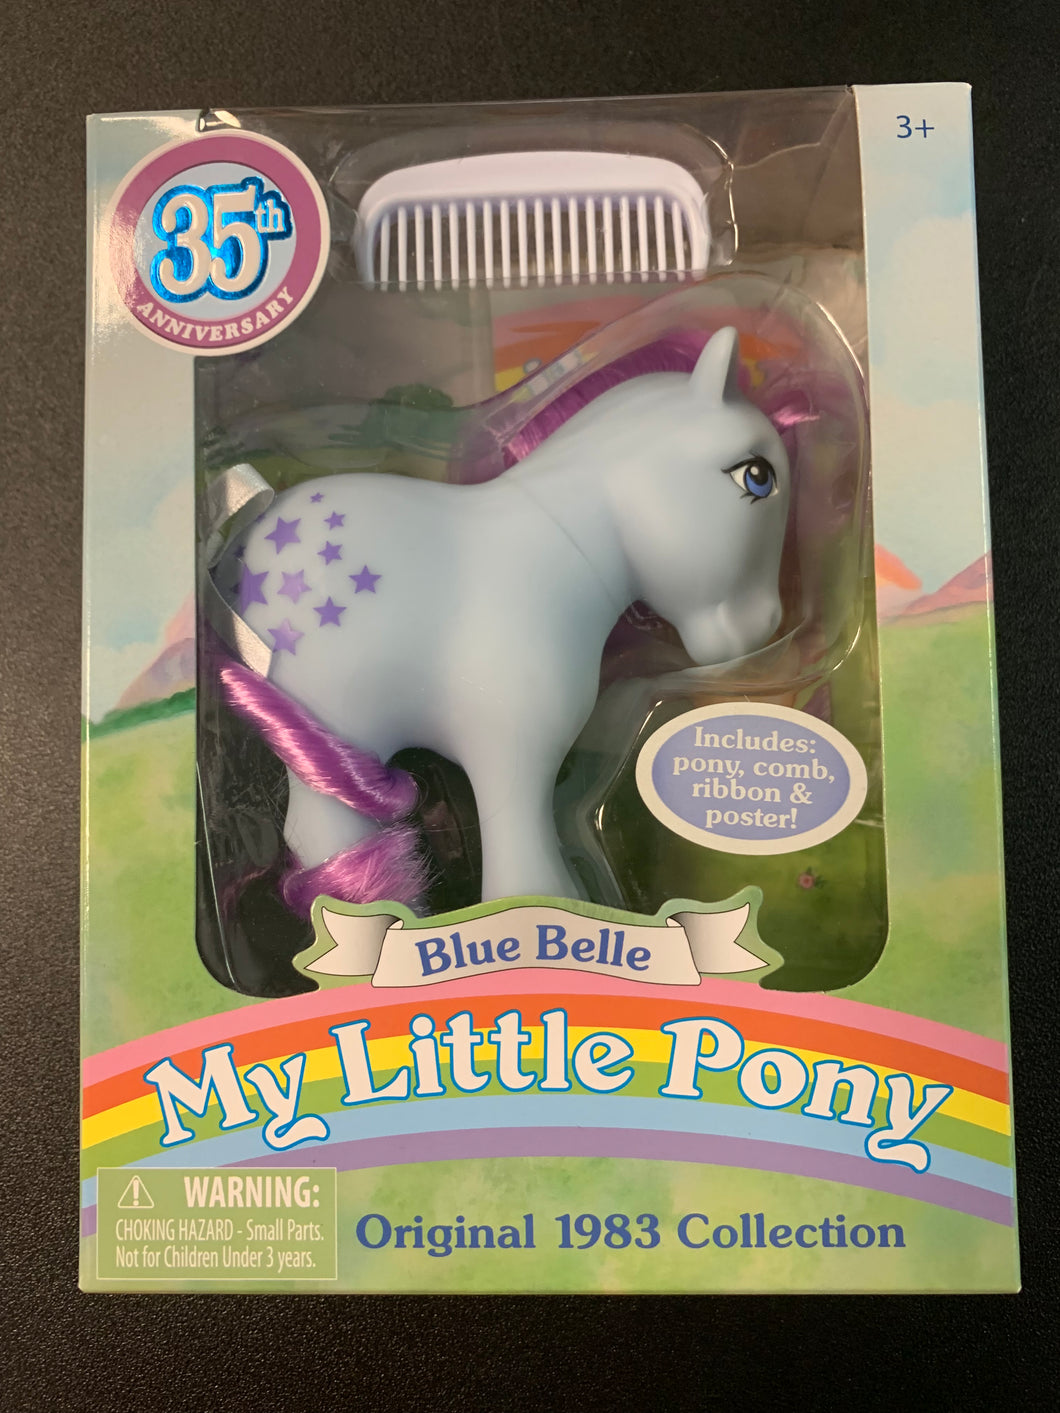 HASBRO MY LITTLE PONY 35th ANNIVERSARY BLUE BELLE ORIGINAL 1983 COLLECTION